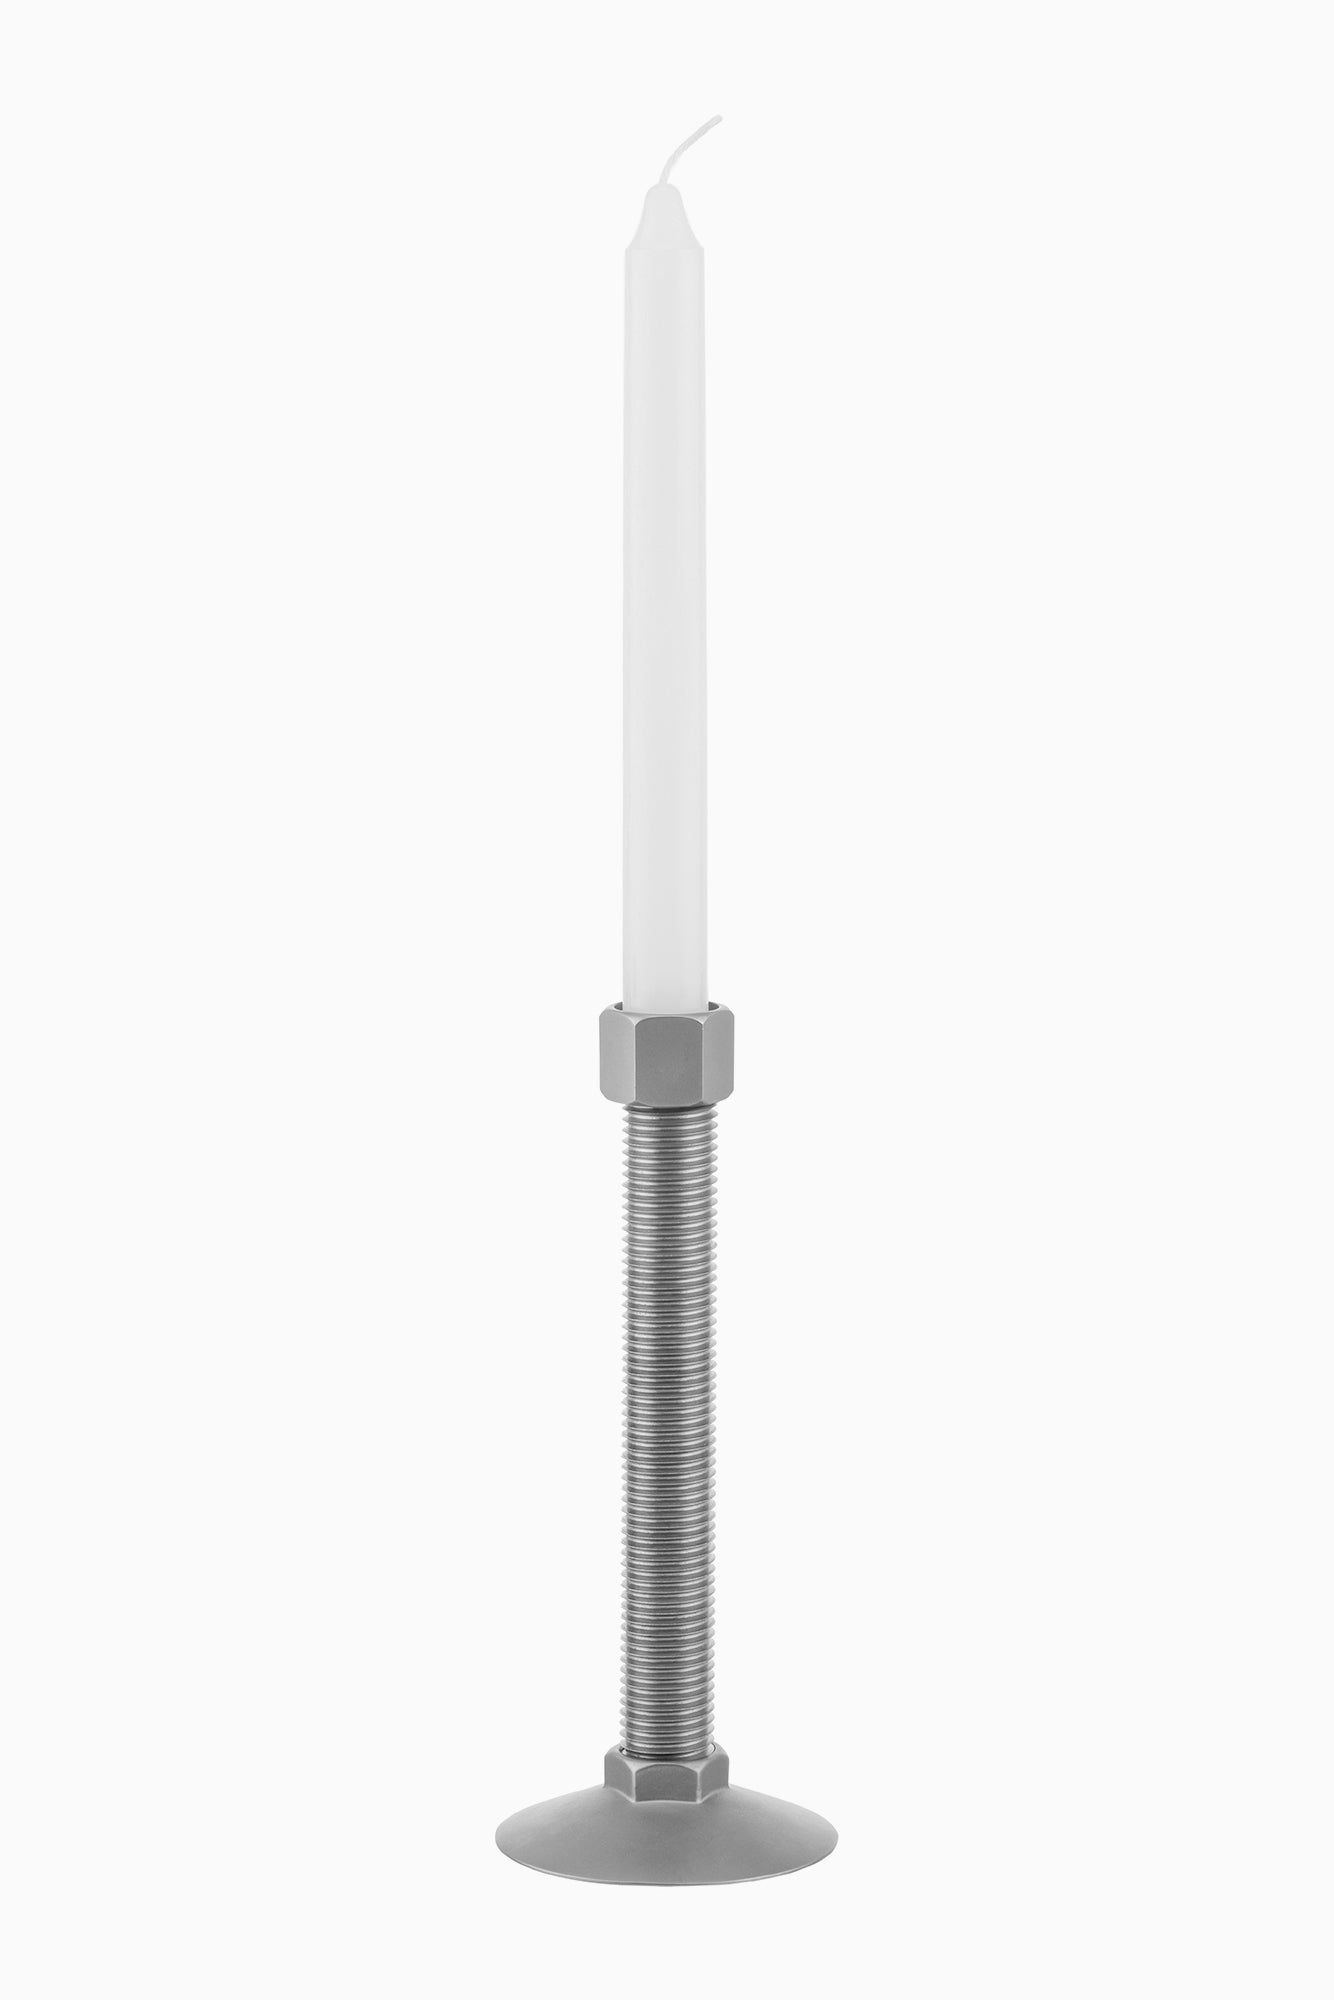 Virgil Abloh Conversational Objects candlestick-Alessi-[interior]-[design]-KIOSK48TH